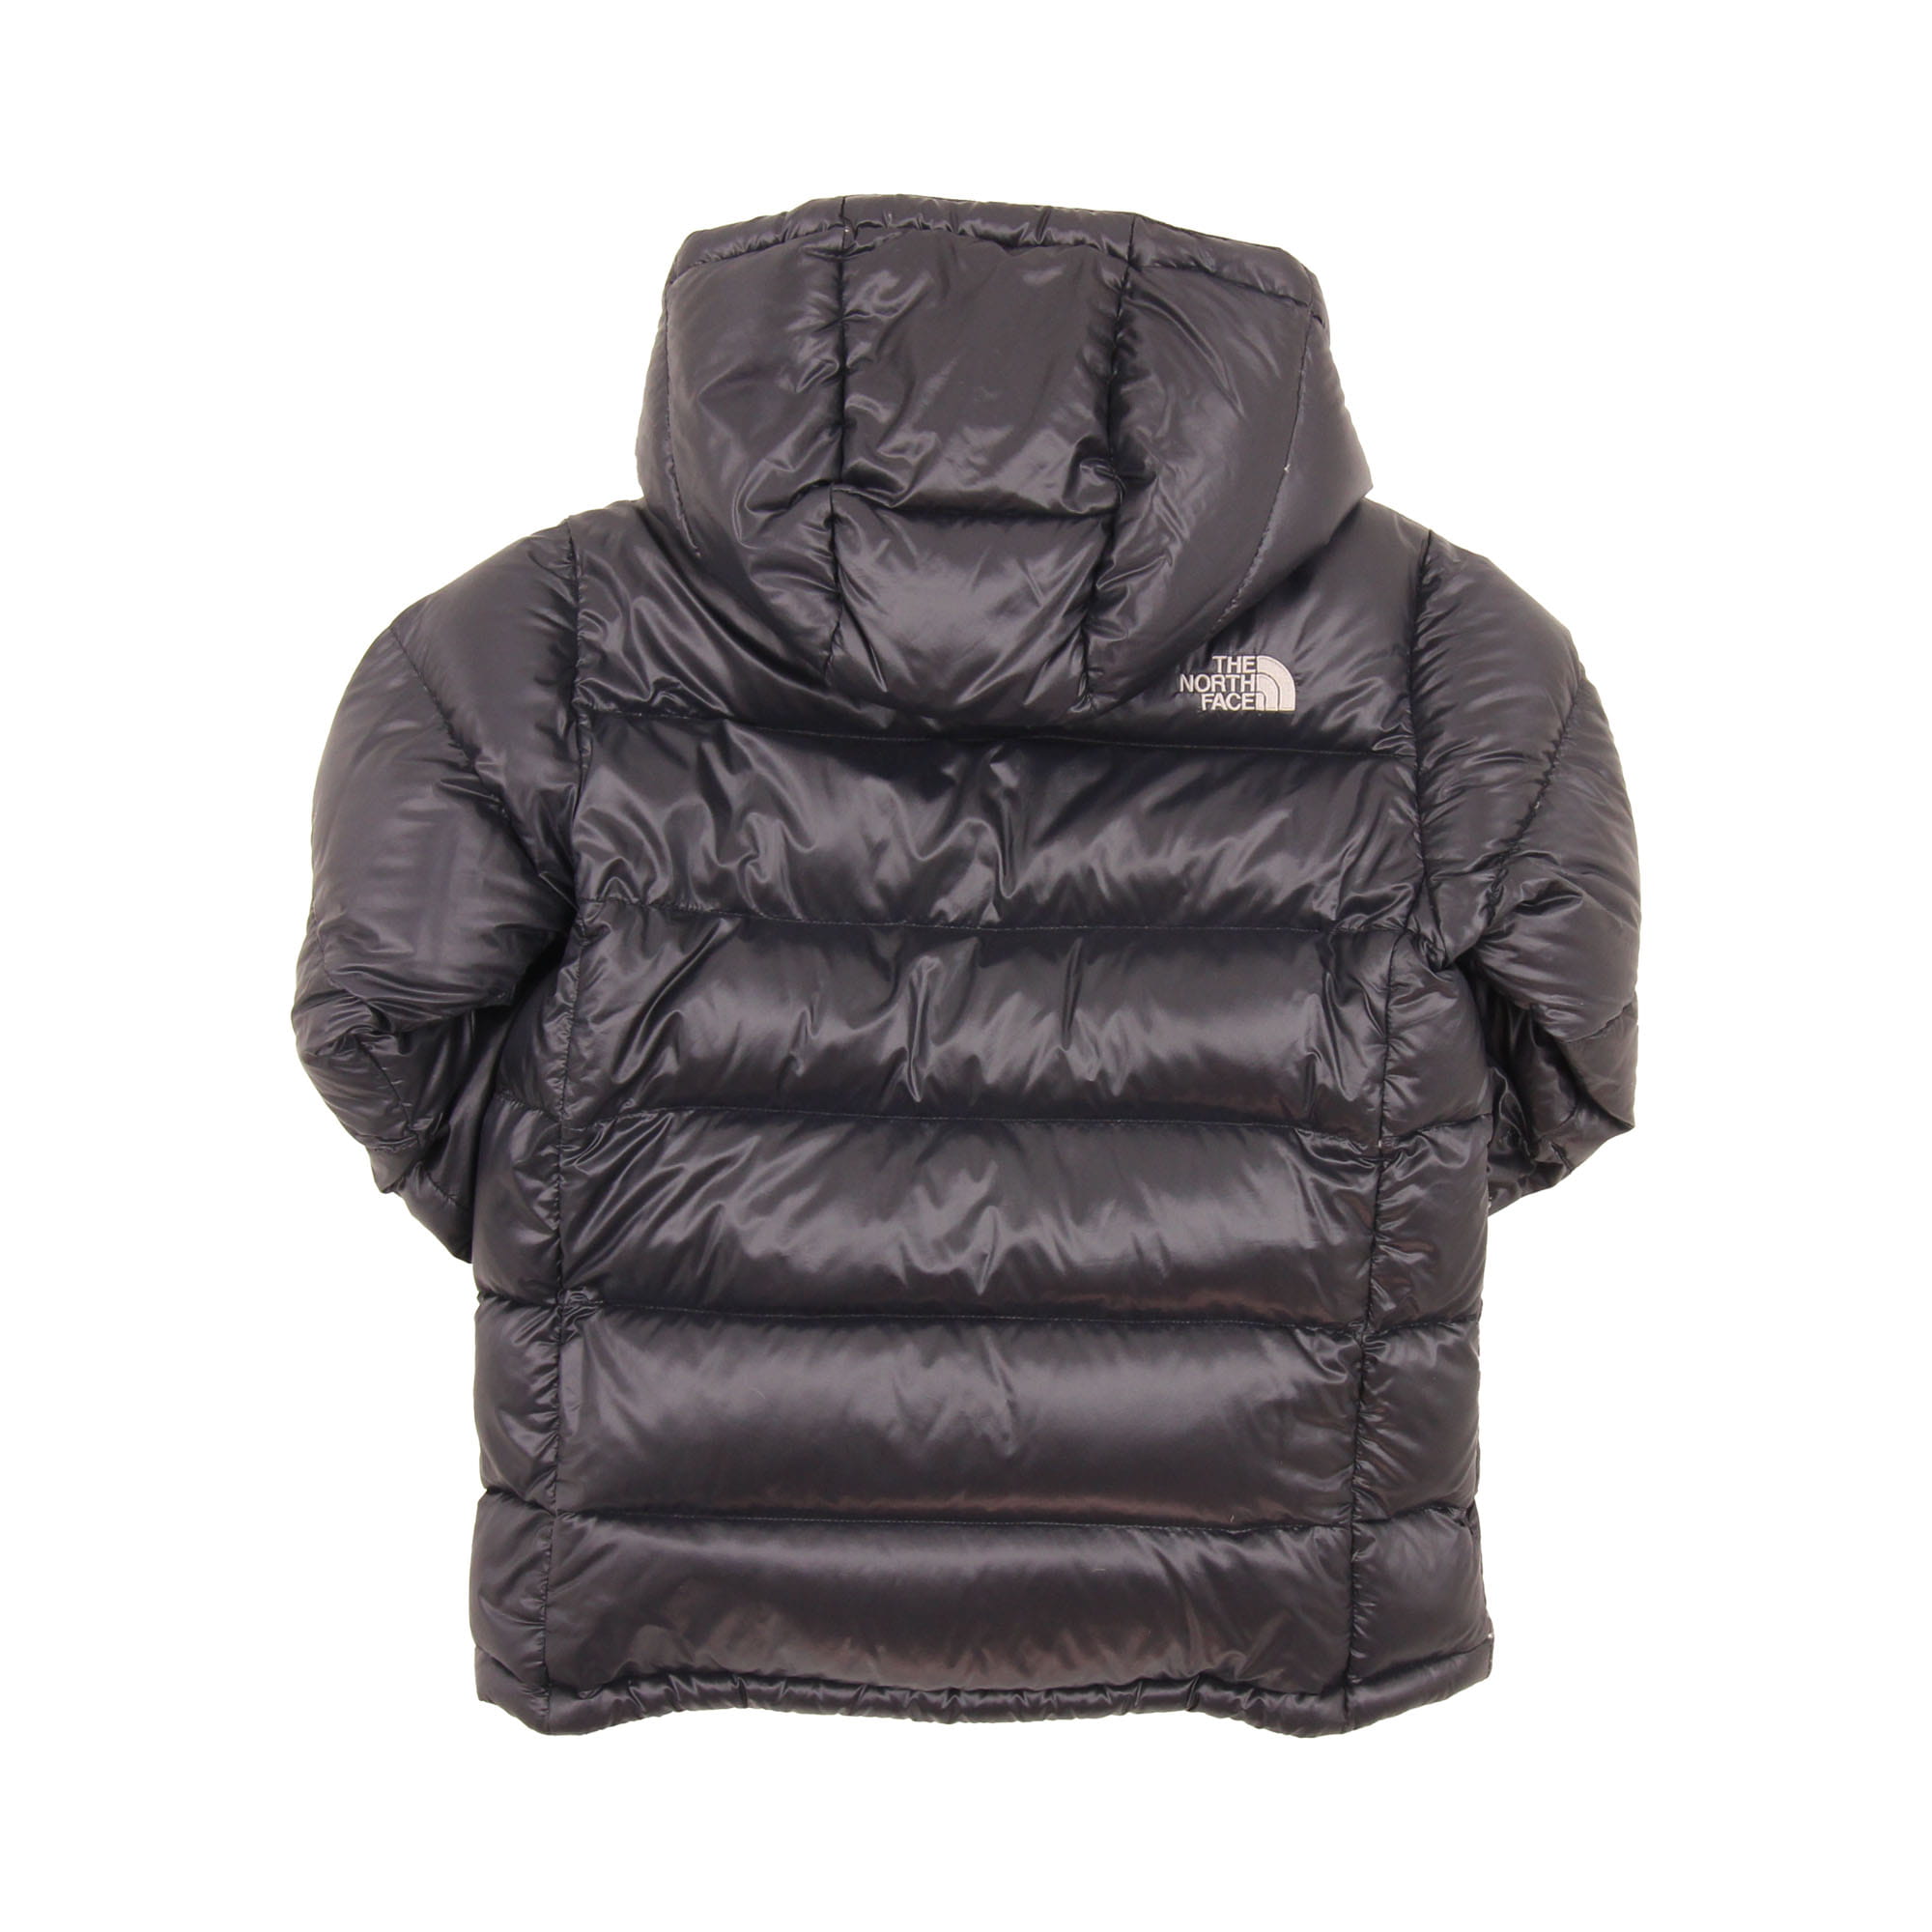 The North Face 700 Hooded Puffer Jacket -  XS/S